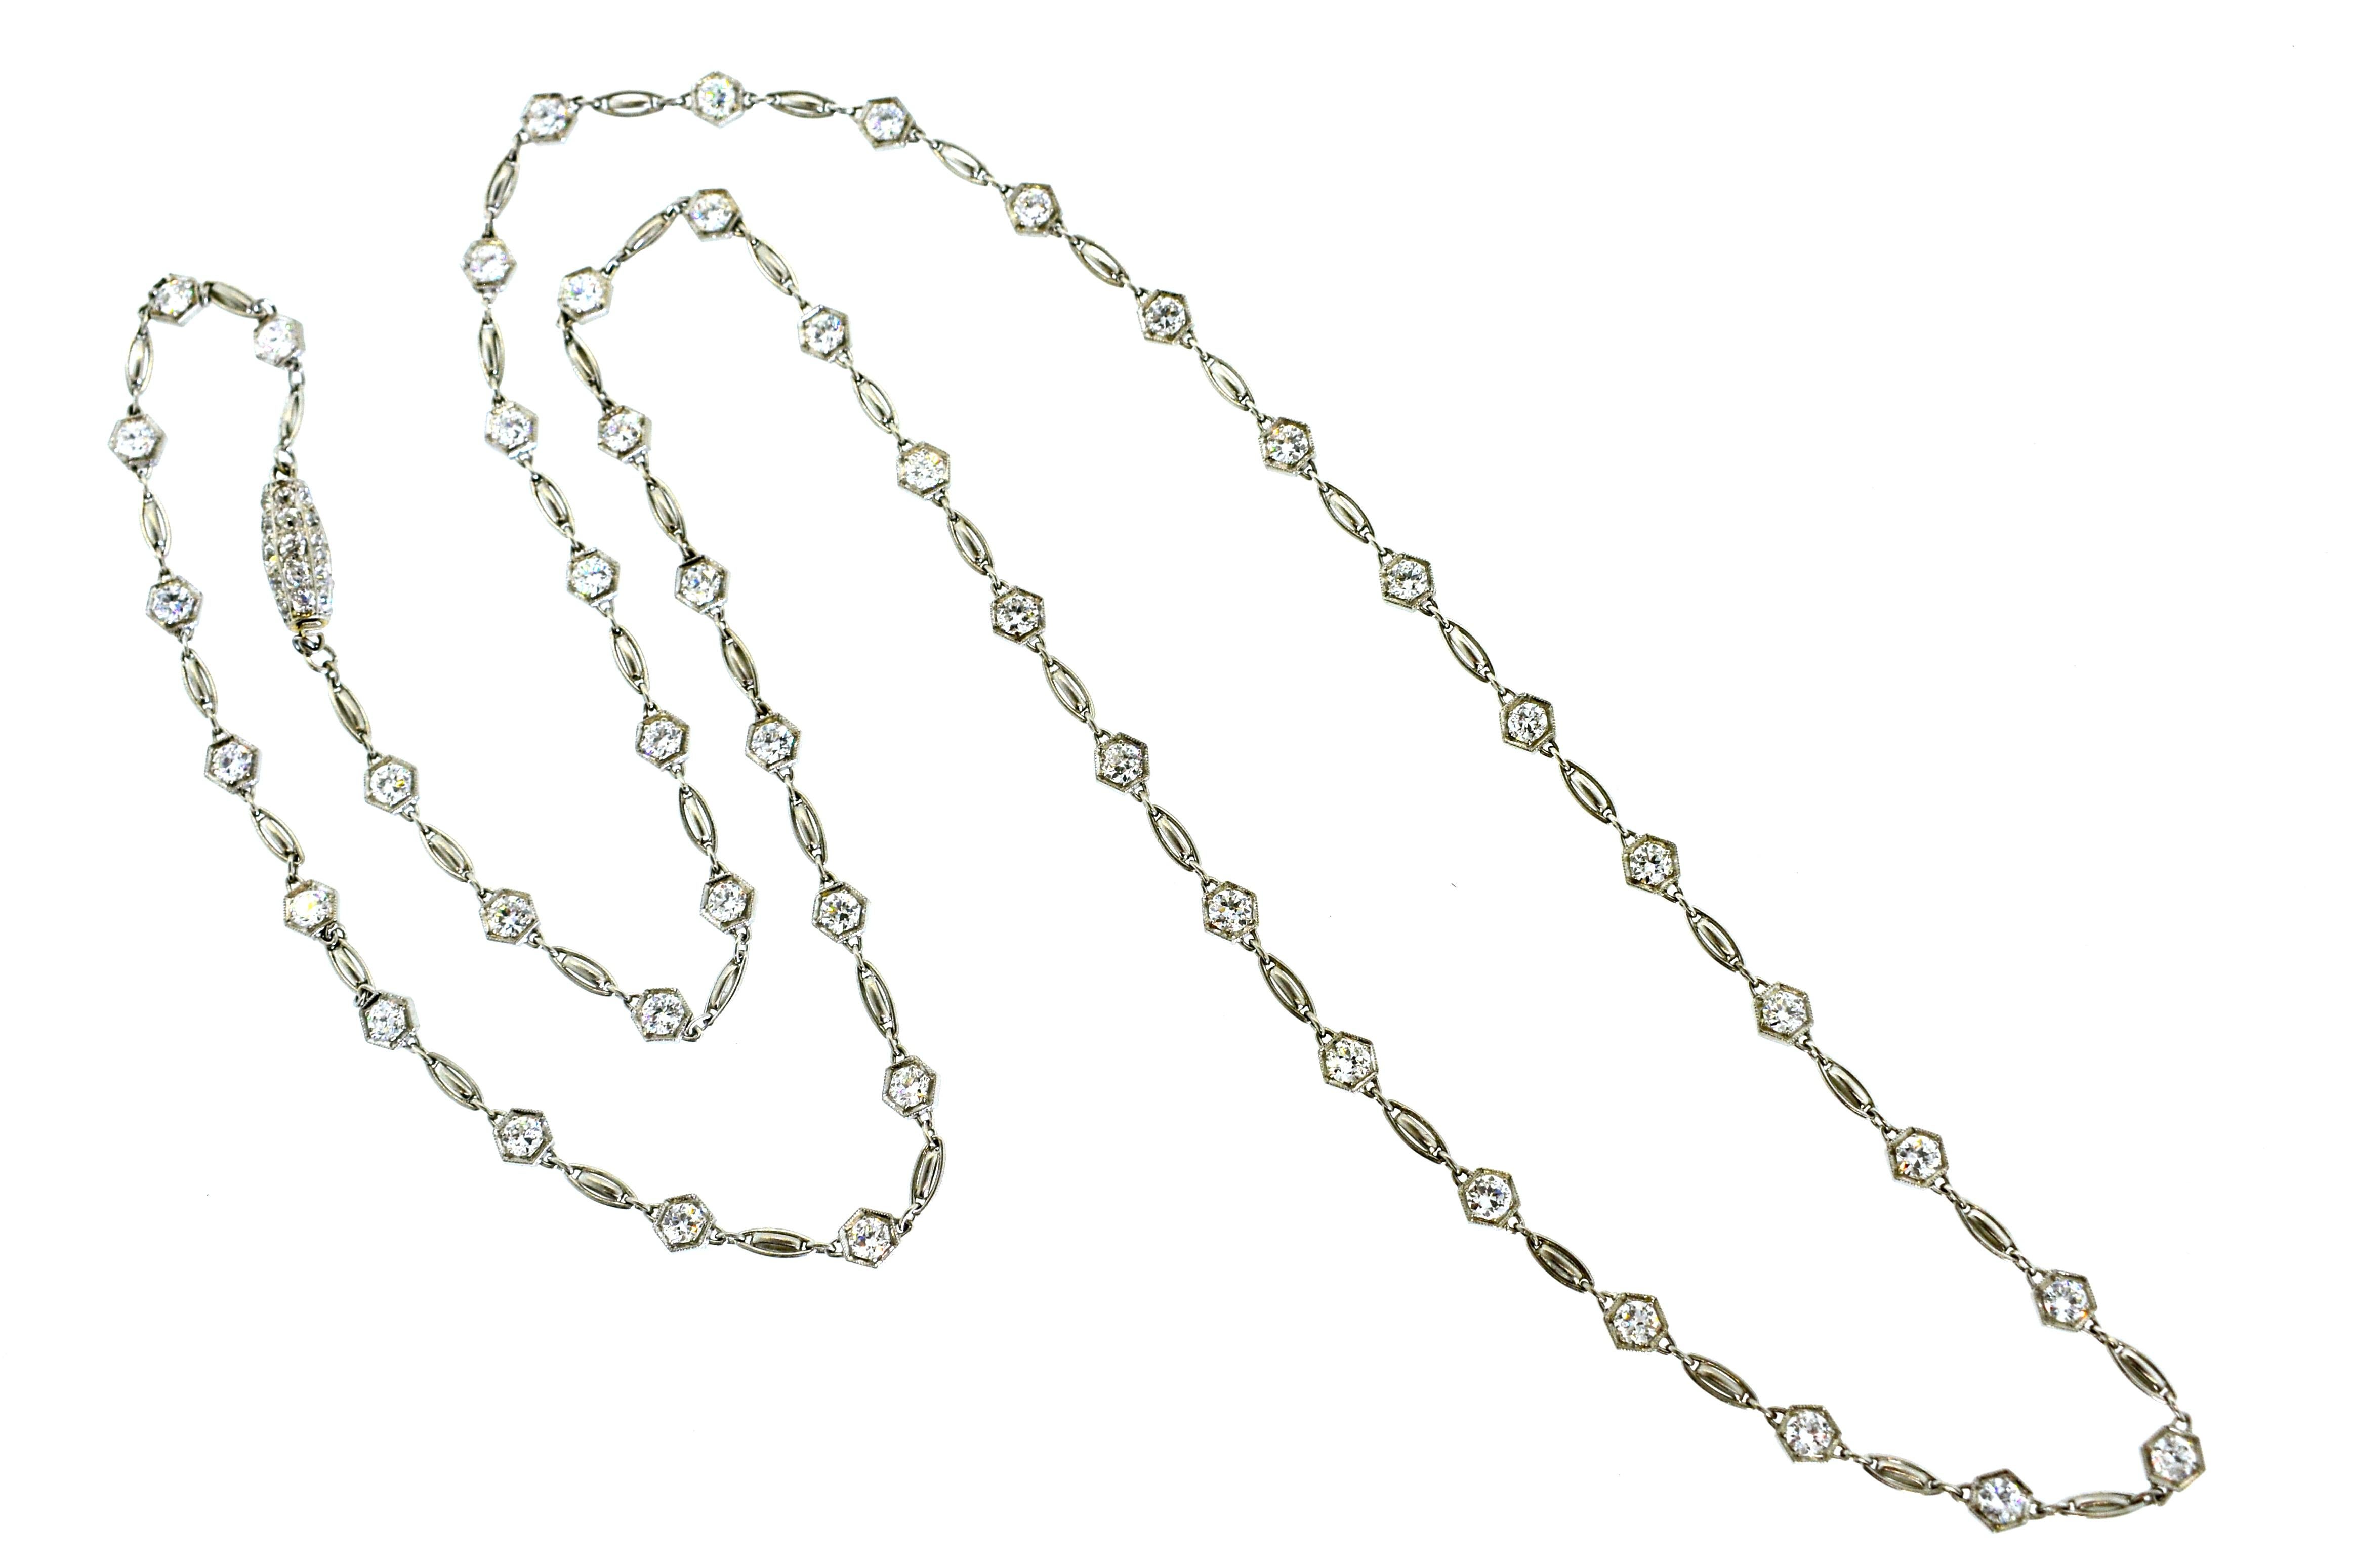 Platinum ornate chain possessing 78 European Cut Diamonds weighing 6.5 cts.  The old cut diamonds are all well matched, white (H/I color), and very slightly included.  This hand made chain is authentically old, possesses fine workmanship and is